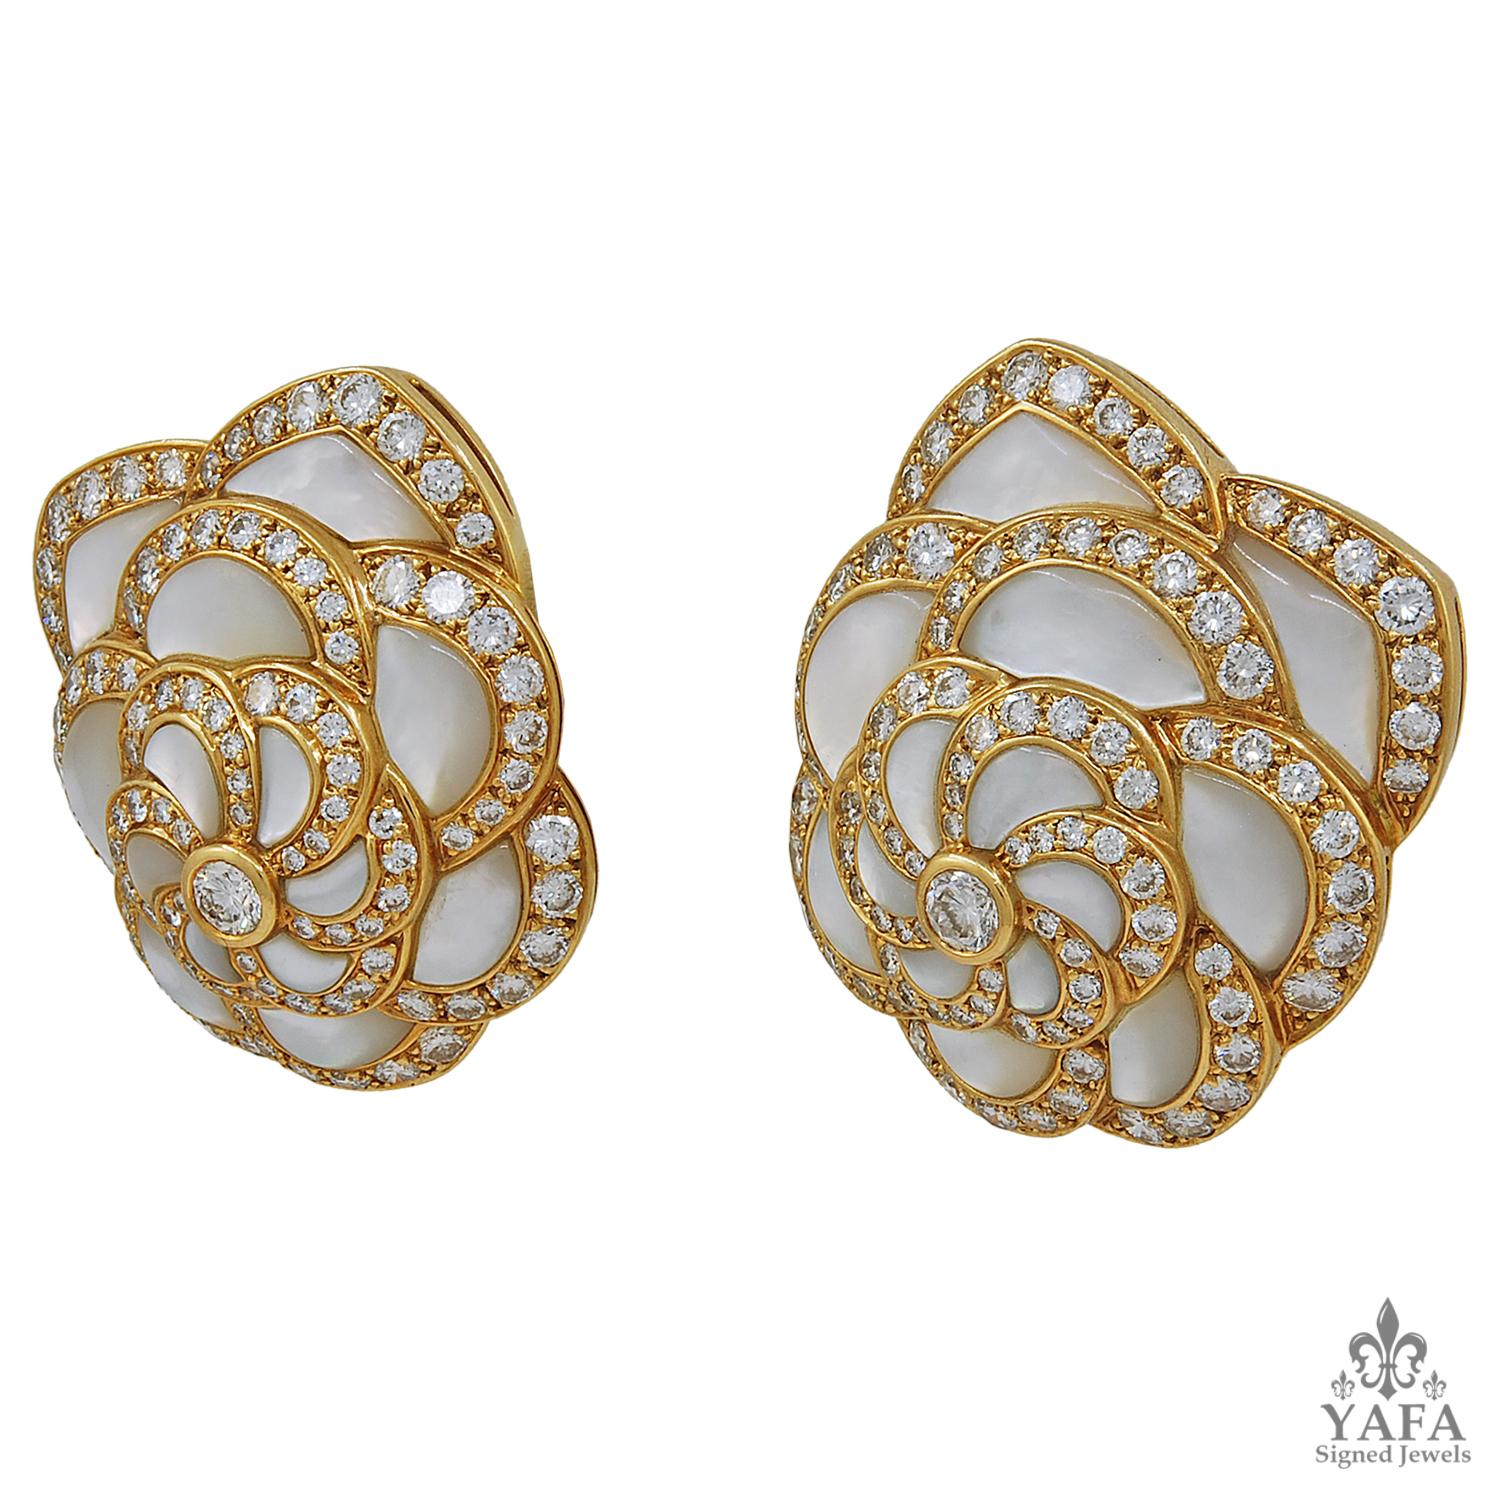 VAN CLEEF & ARPELS Diamond, Mother of Pearl Flower Earrings
A pair of 18k yellow gold flower motif ear clips, set with diamonds and mother of pearl, signed Van Cleef & Arpels.
dimensions approx. 1.25″ in length by 1″ by width
Signed “VAN CLEEF &